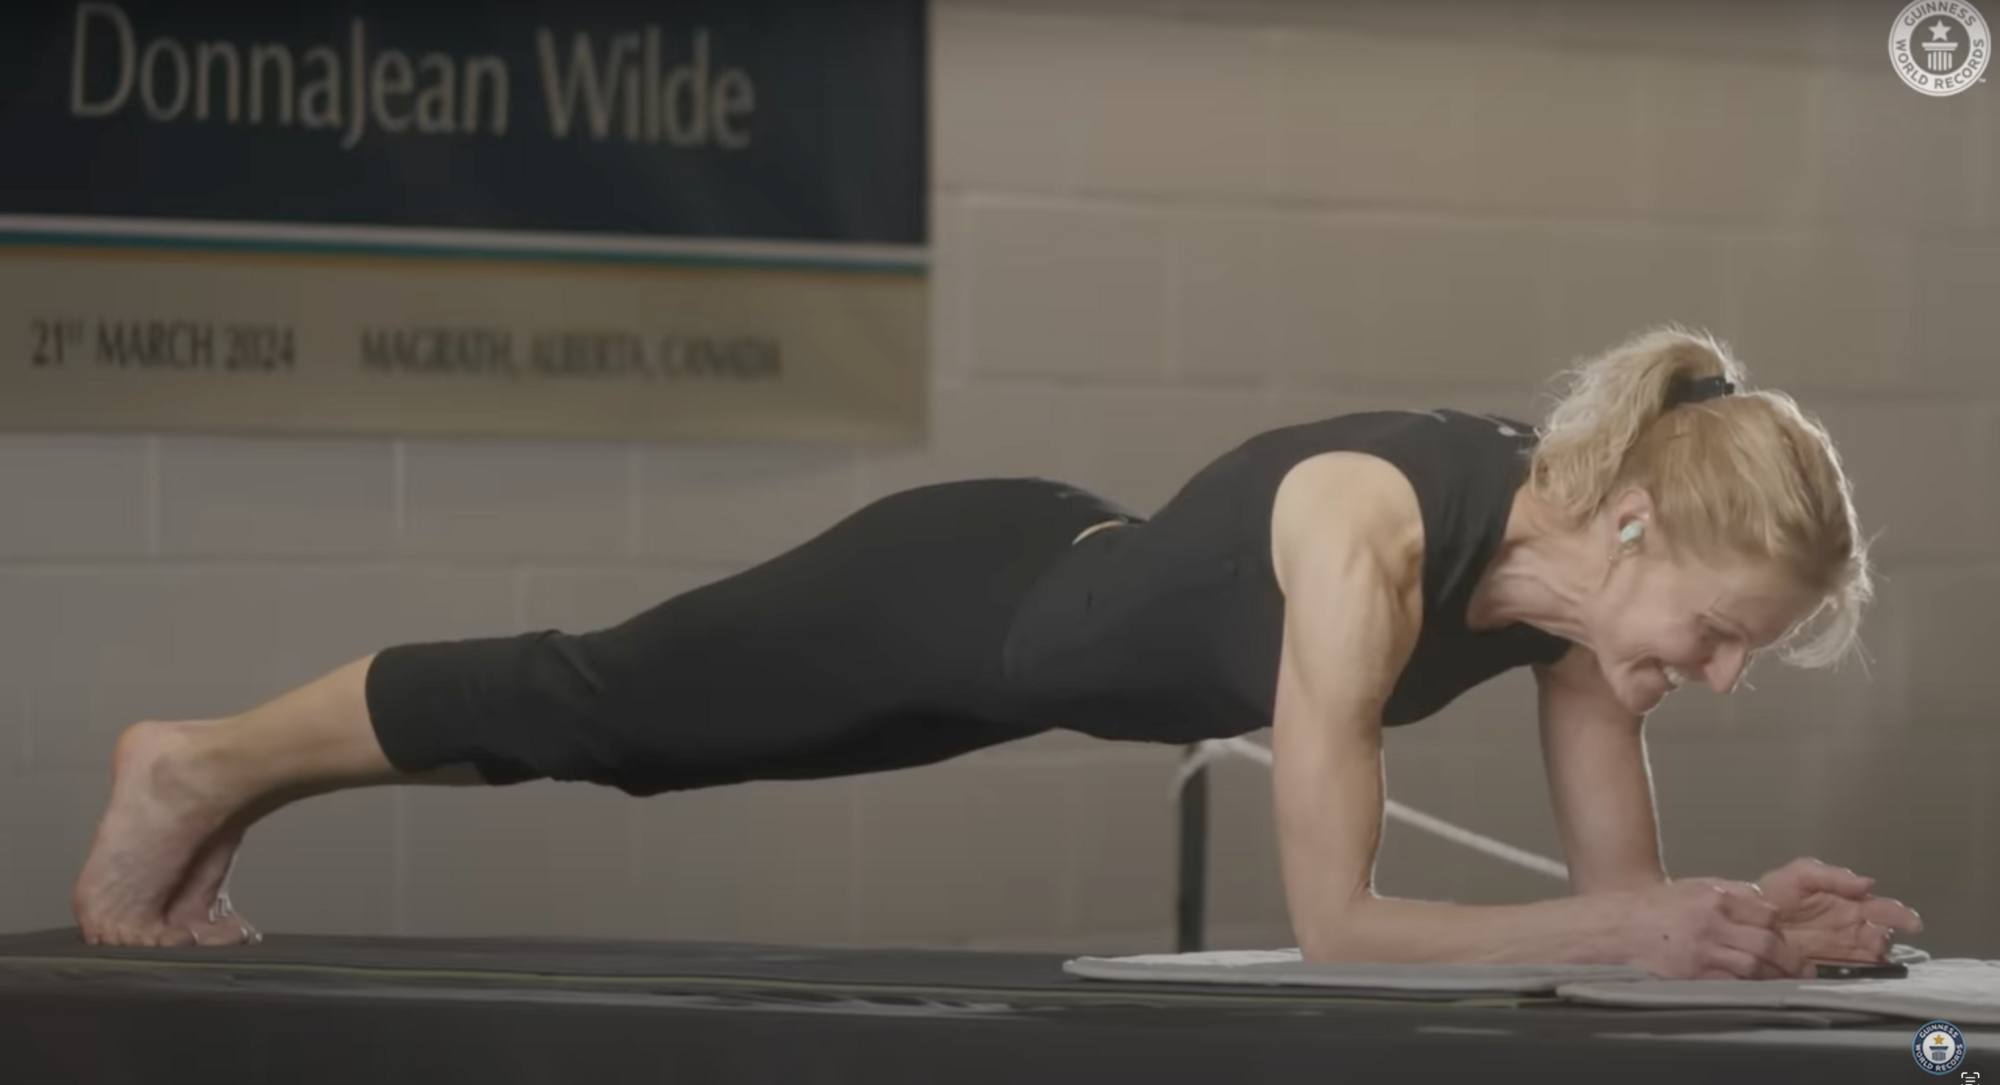 A 58-year-old teacher from Canada stood in the plank for more than 4 hours and broke the world record. Photos and video